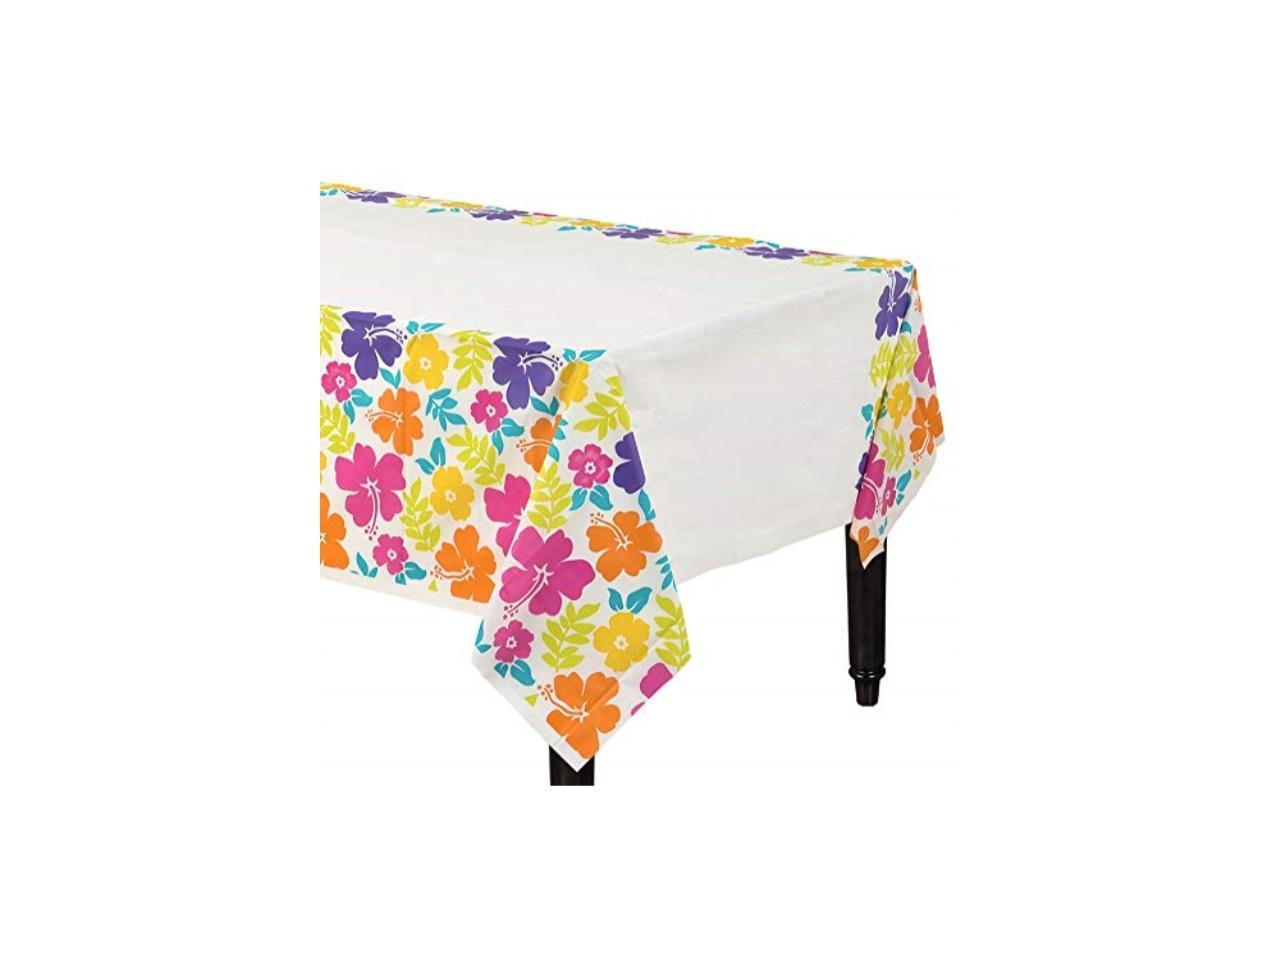 Amscan 571977 Supplies Epic Party Table Cover 54 x 96 Multi 